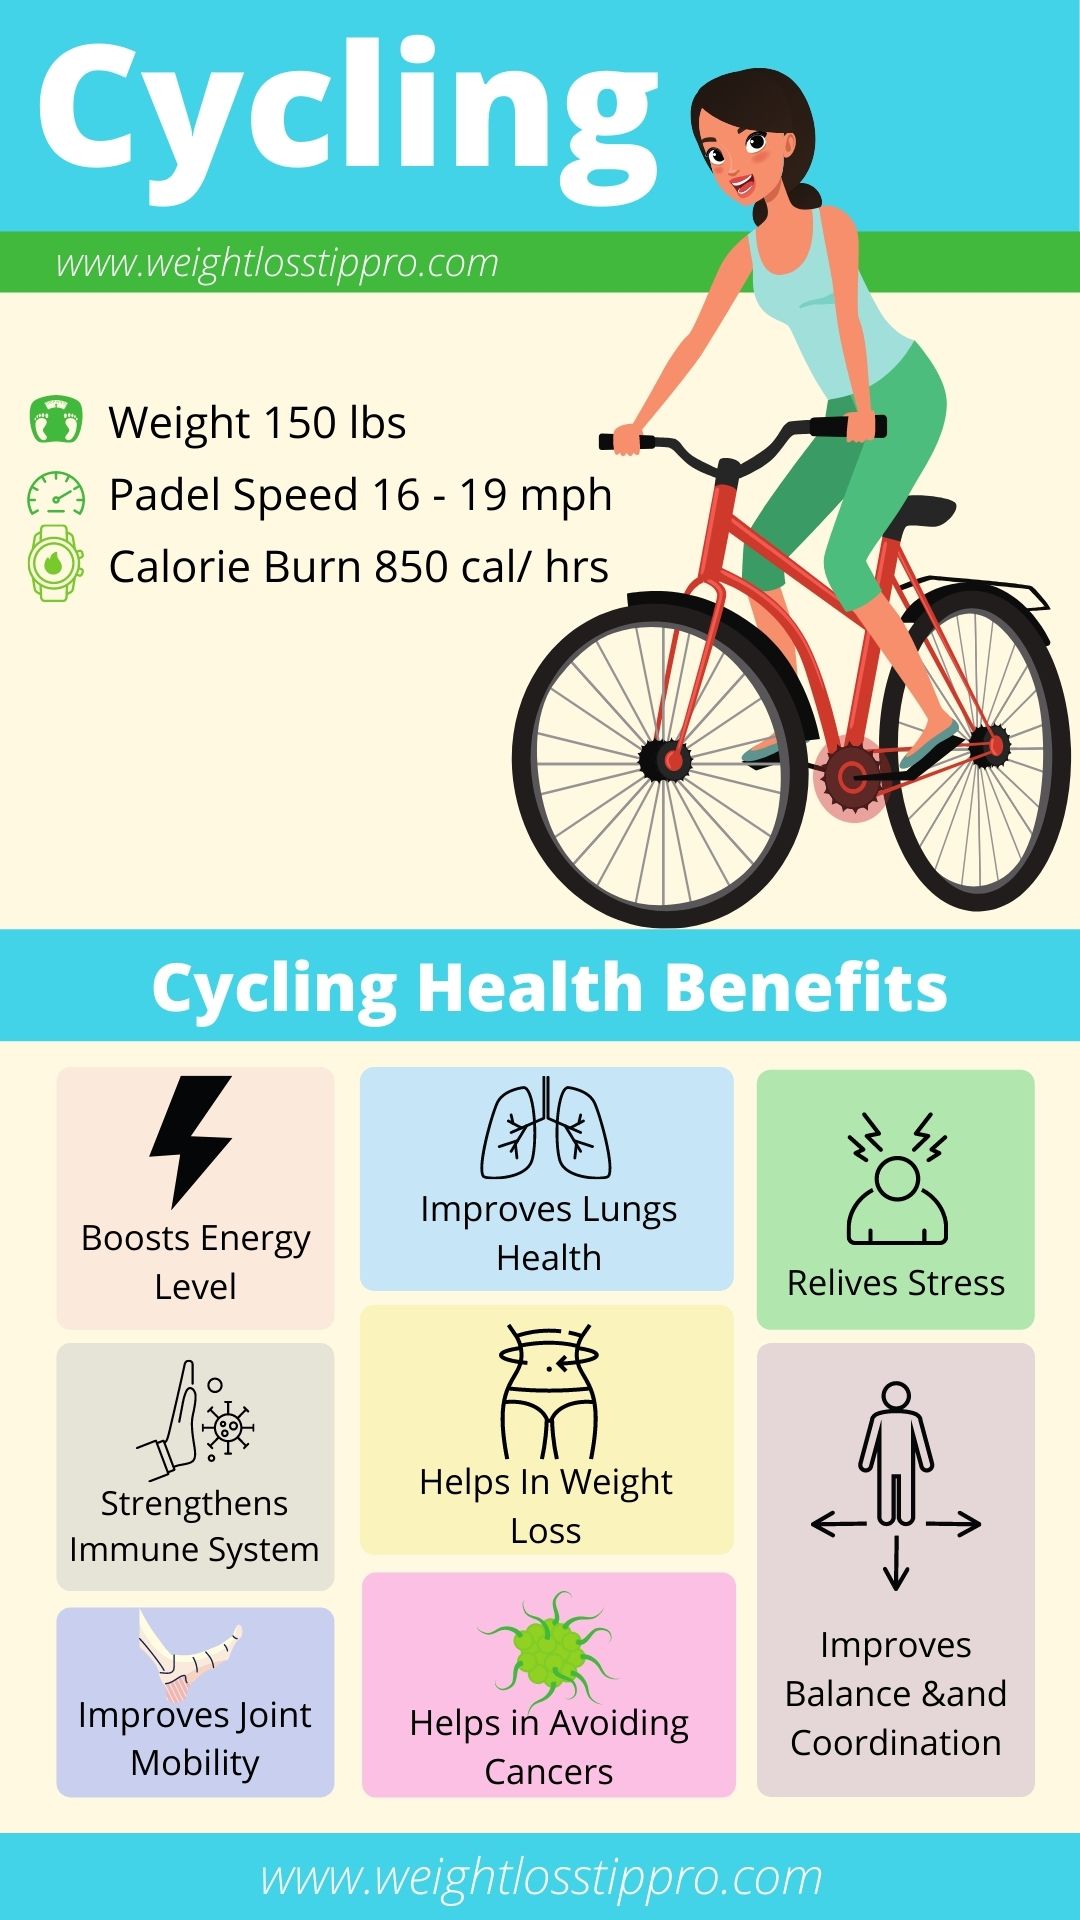 Does Cycling Good For Weight Loss? - Weight Loss